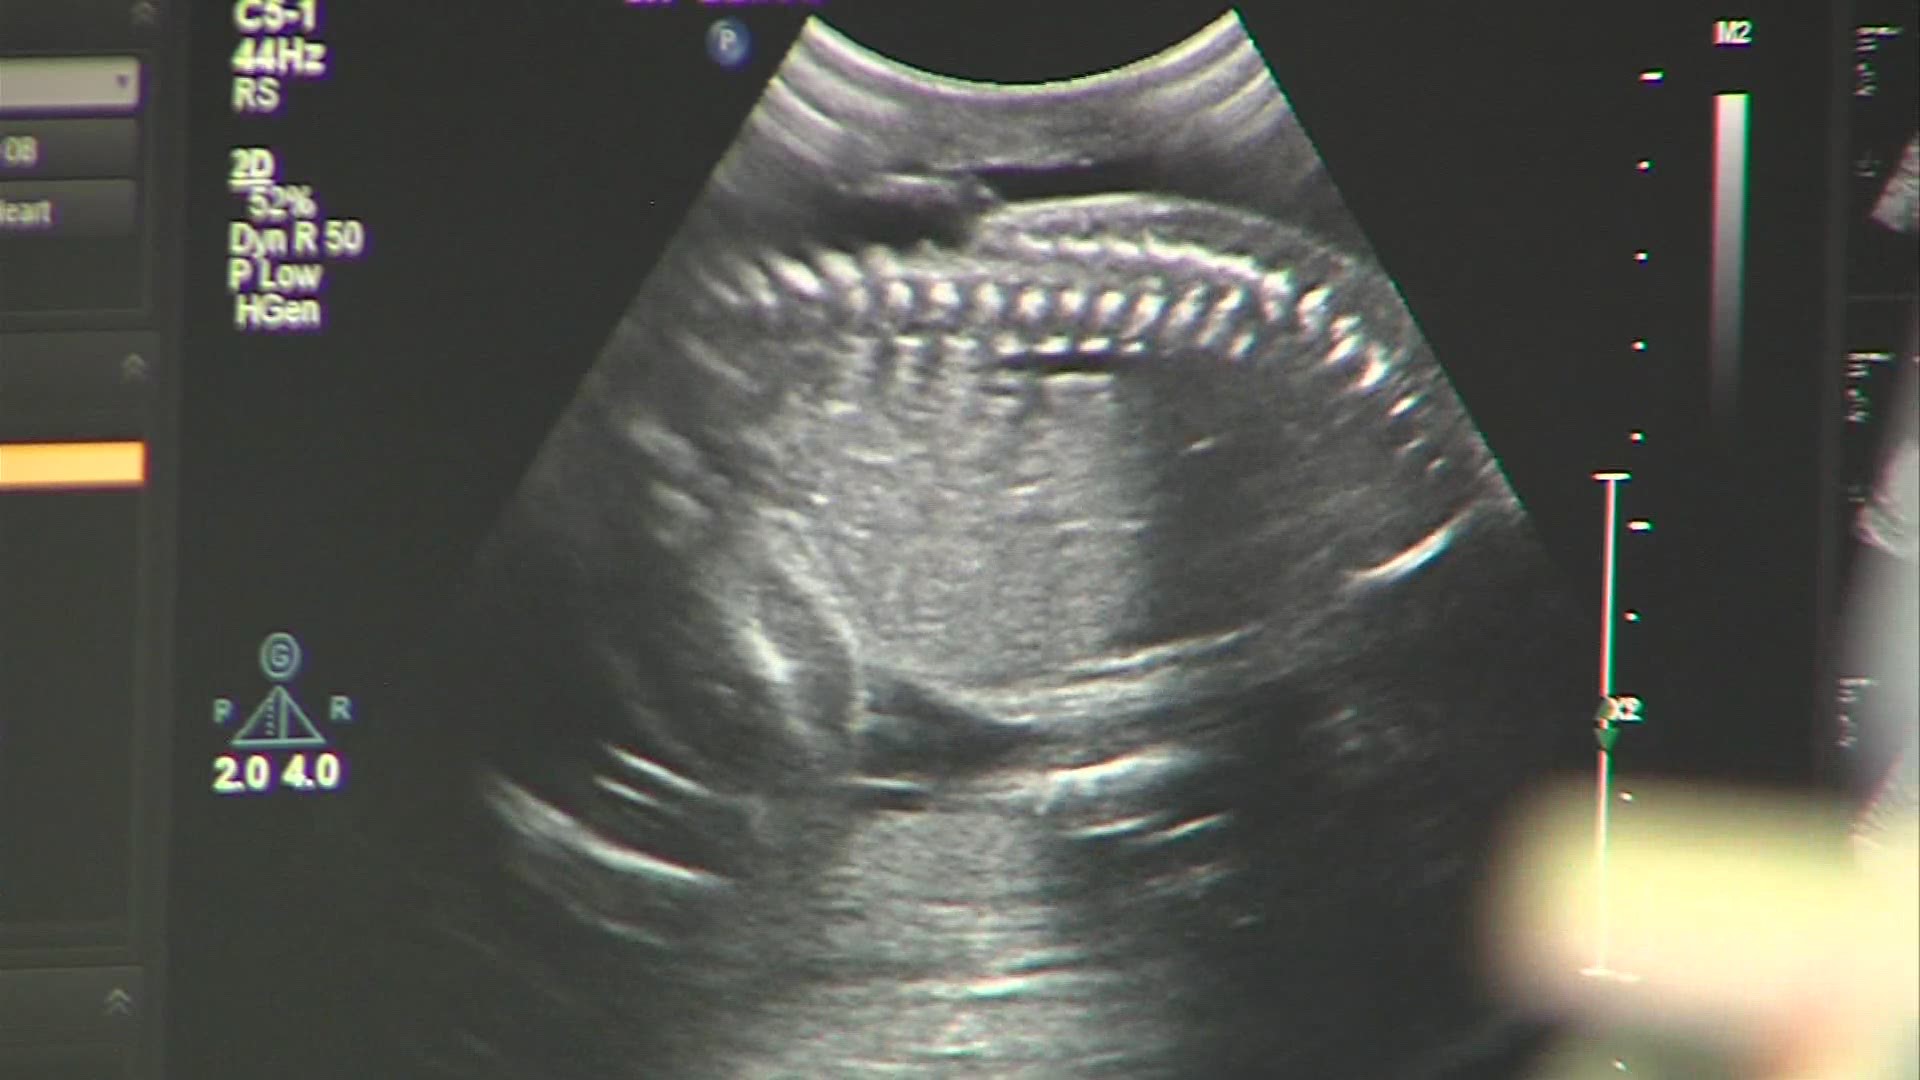 June 19, 2019: The Cleveland Clinic just released this video showing their first-ever successful in utero surgery on a 23-week-old fetus. The operation was done to repair the baby's spina bifida birth defect. The baby was born June 3, a few months after this surgery took place in February.